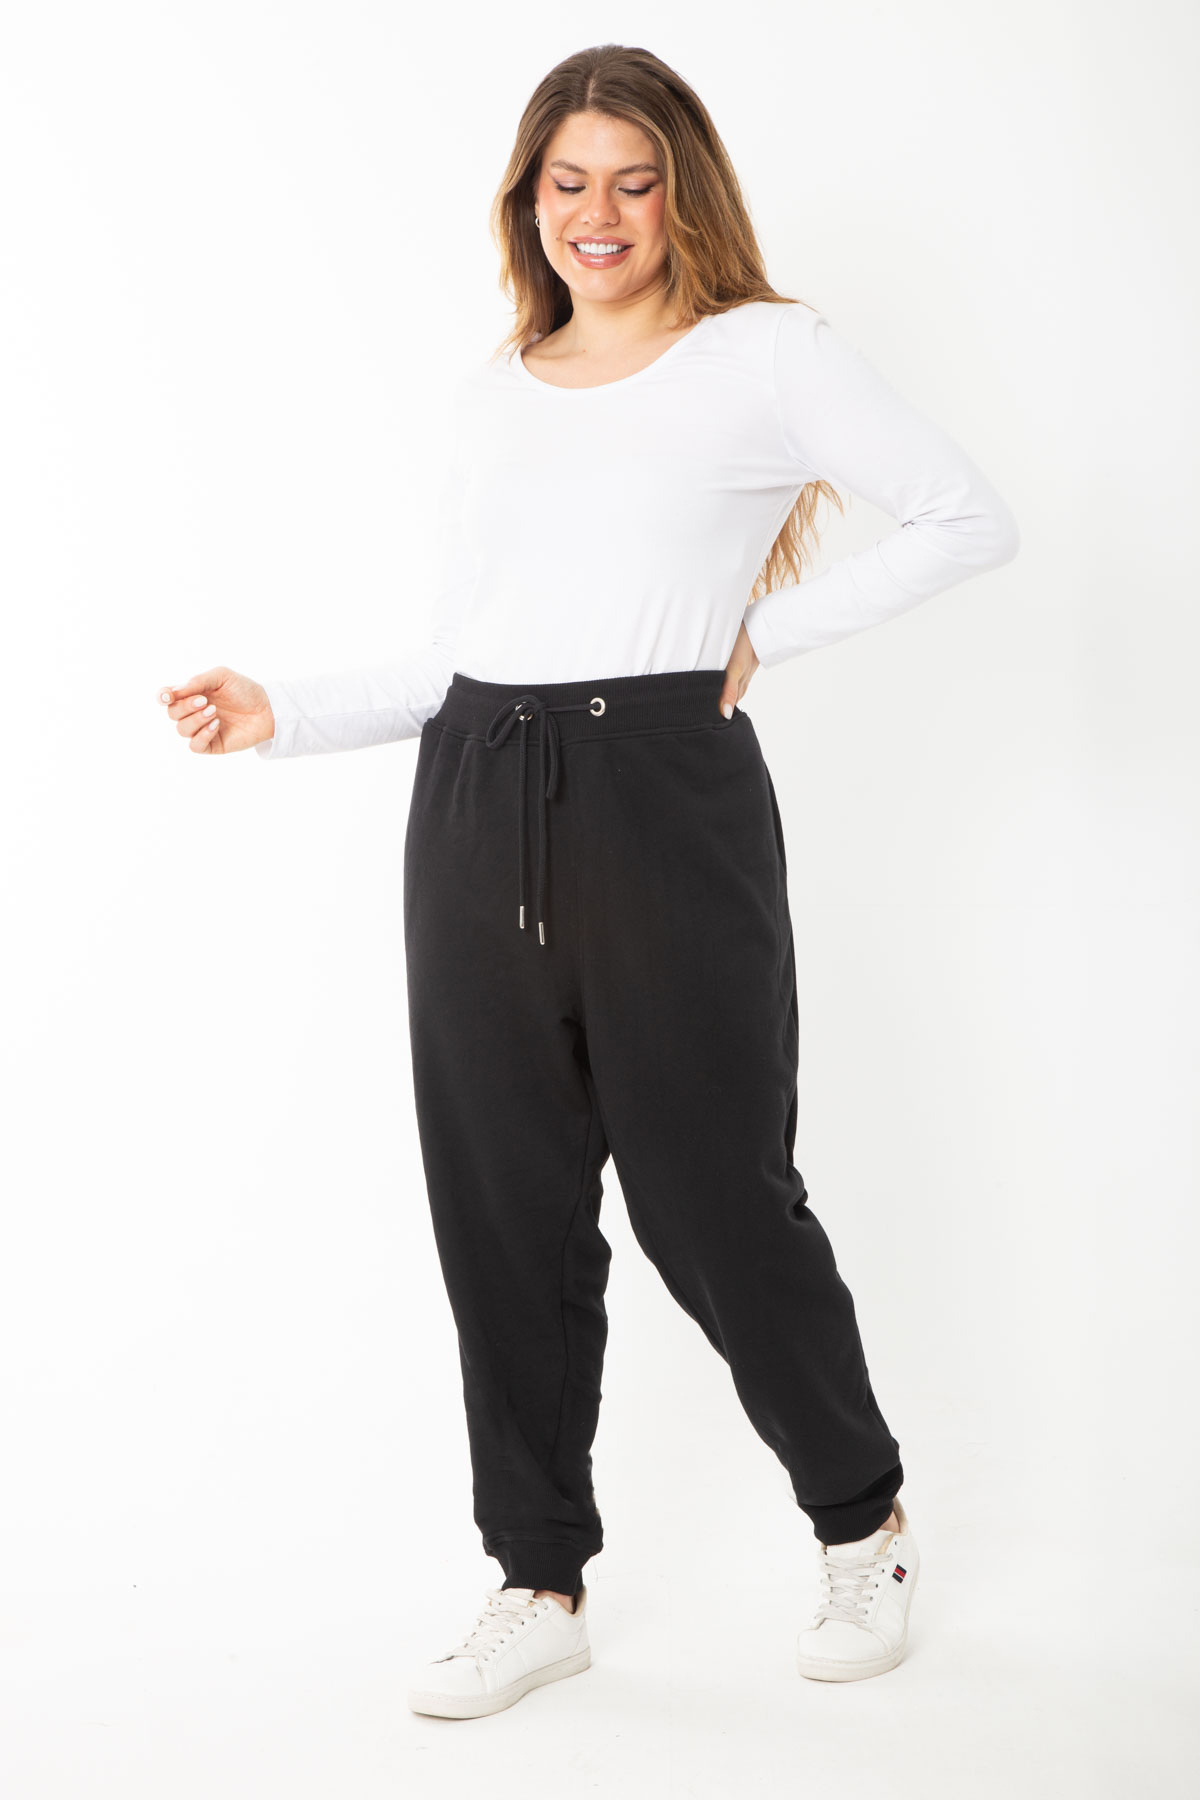 Şans Women's Plus Size Black Eyelet Laced Waist And Ribbed Cuff Tracksuit Trousers